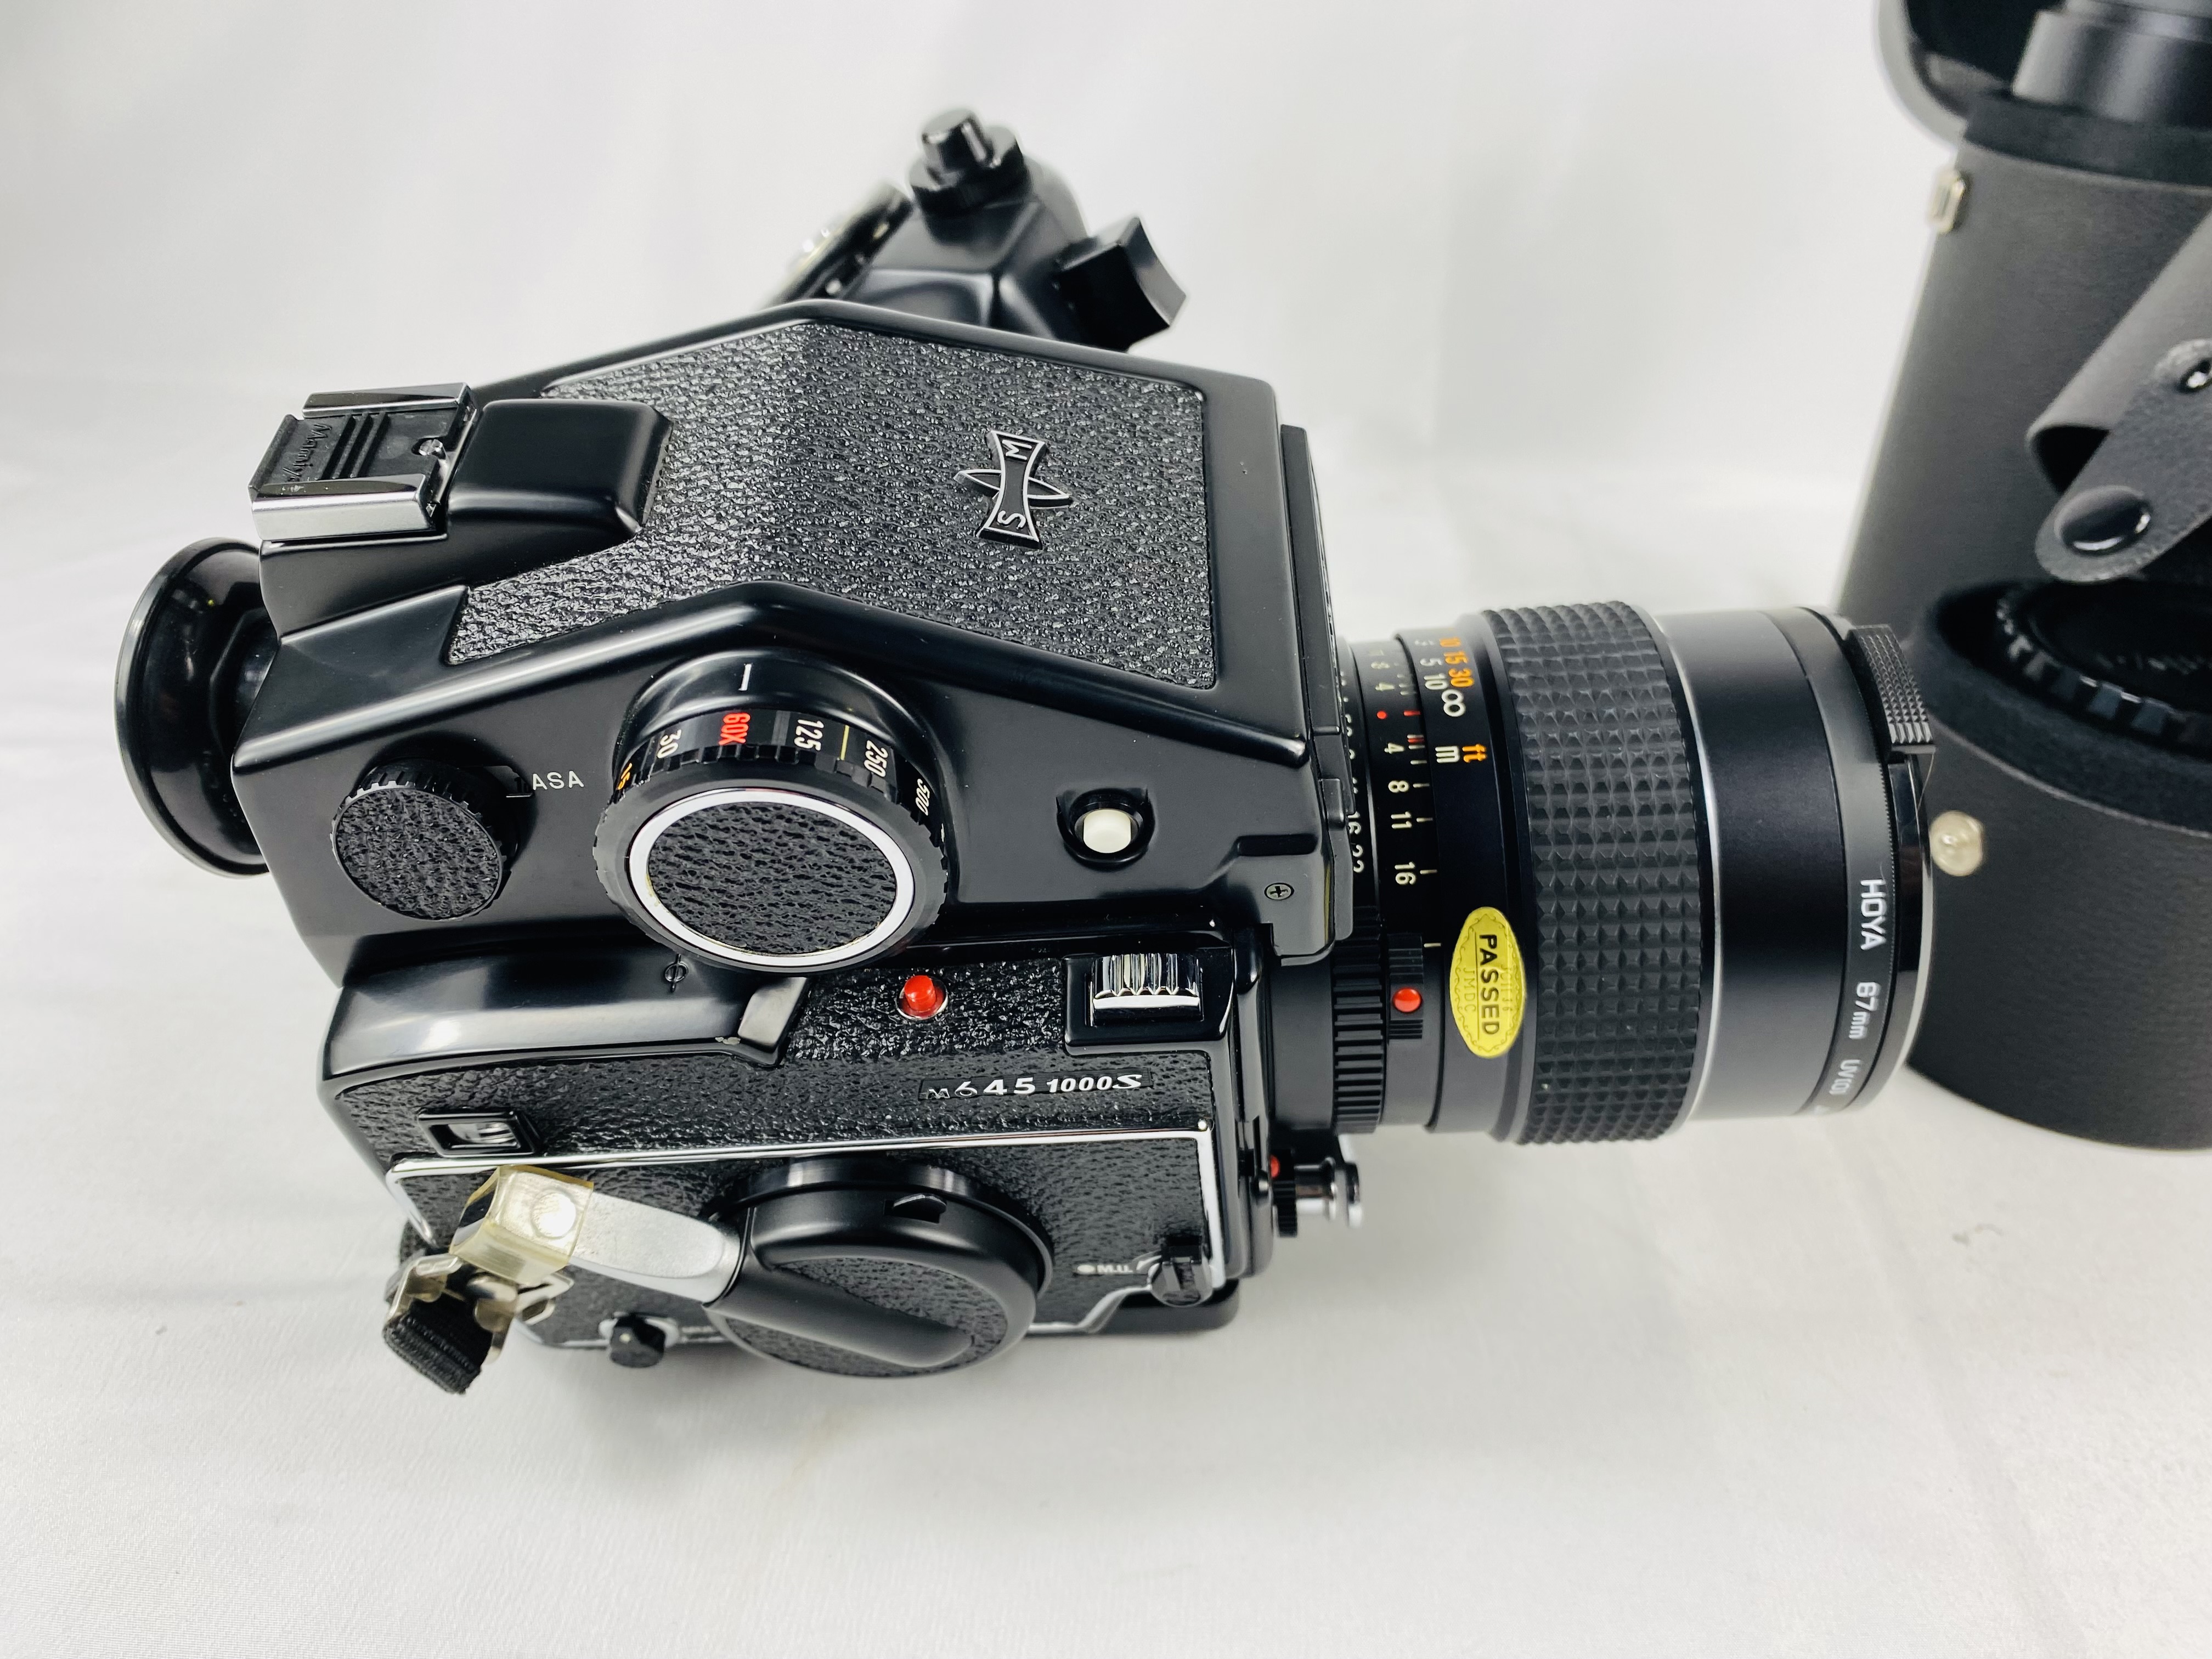 Mamia 64Y 1000S camera and lenses - Image 4 of 4